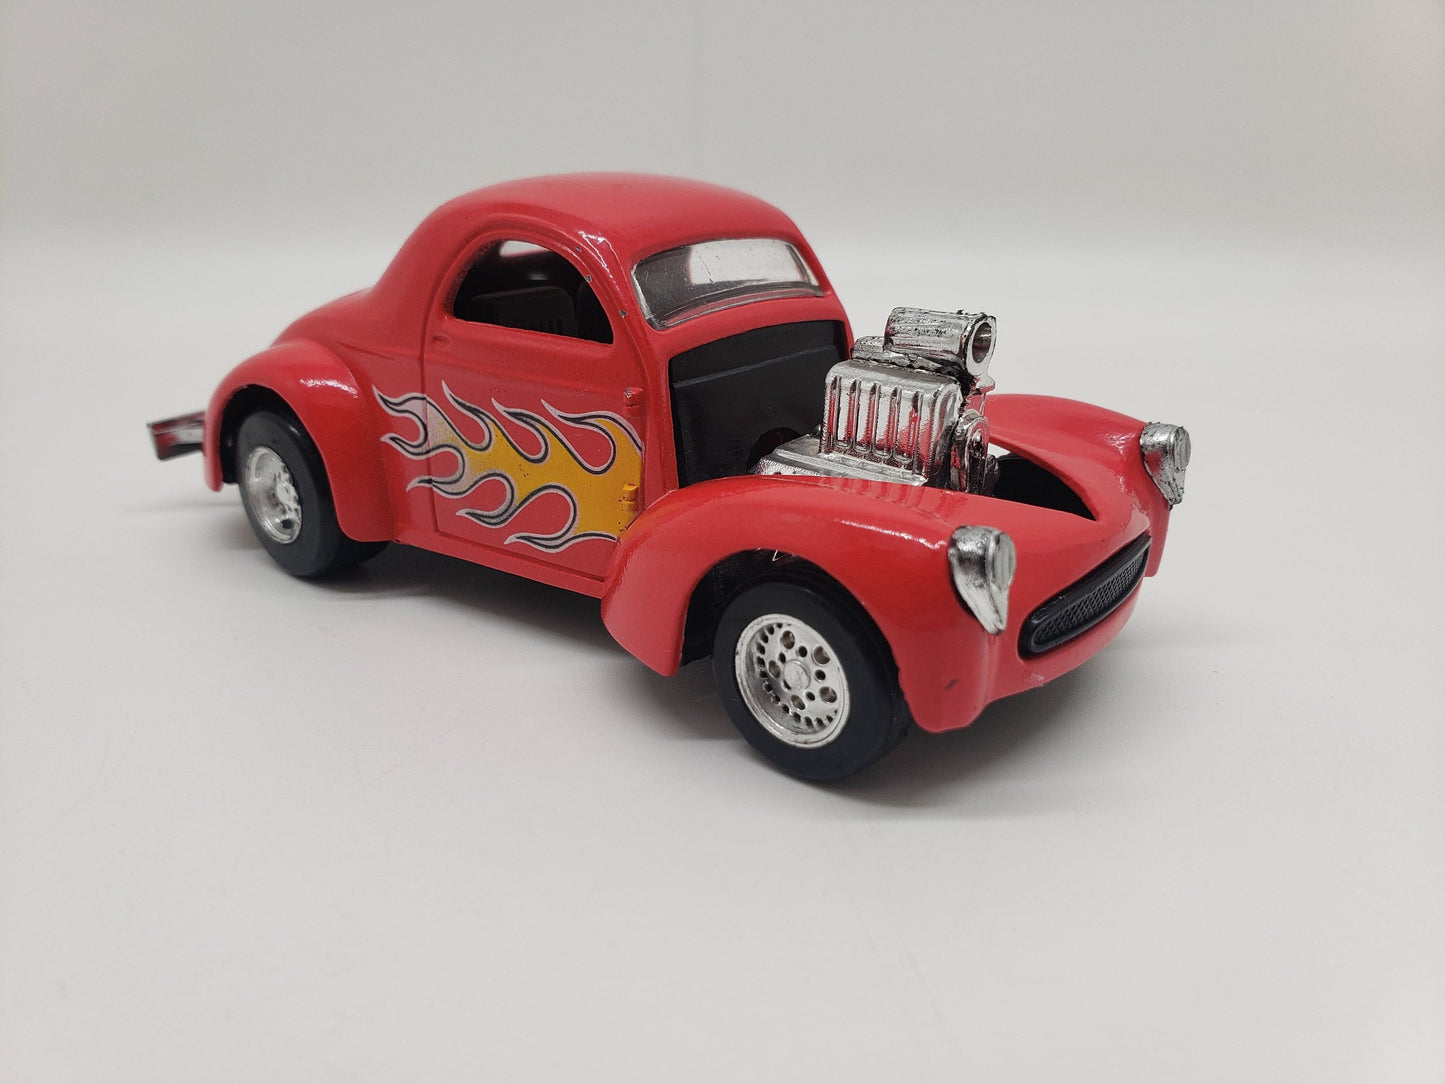 Majorette 1941 Willys Coupe Willys 41 Red Hot Rods Vintage Collectable Scale Model Miniature Toy Car Perfect Birthday Gift